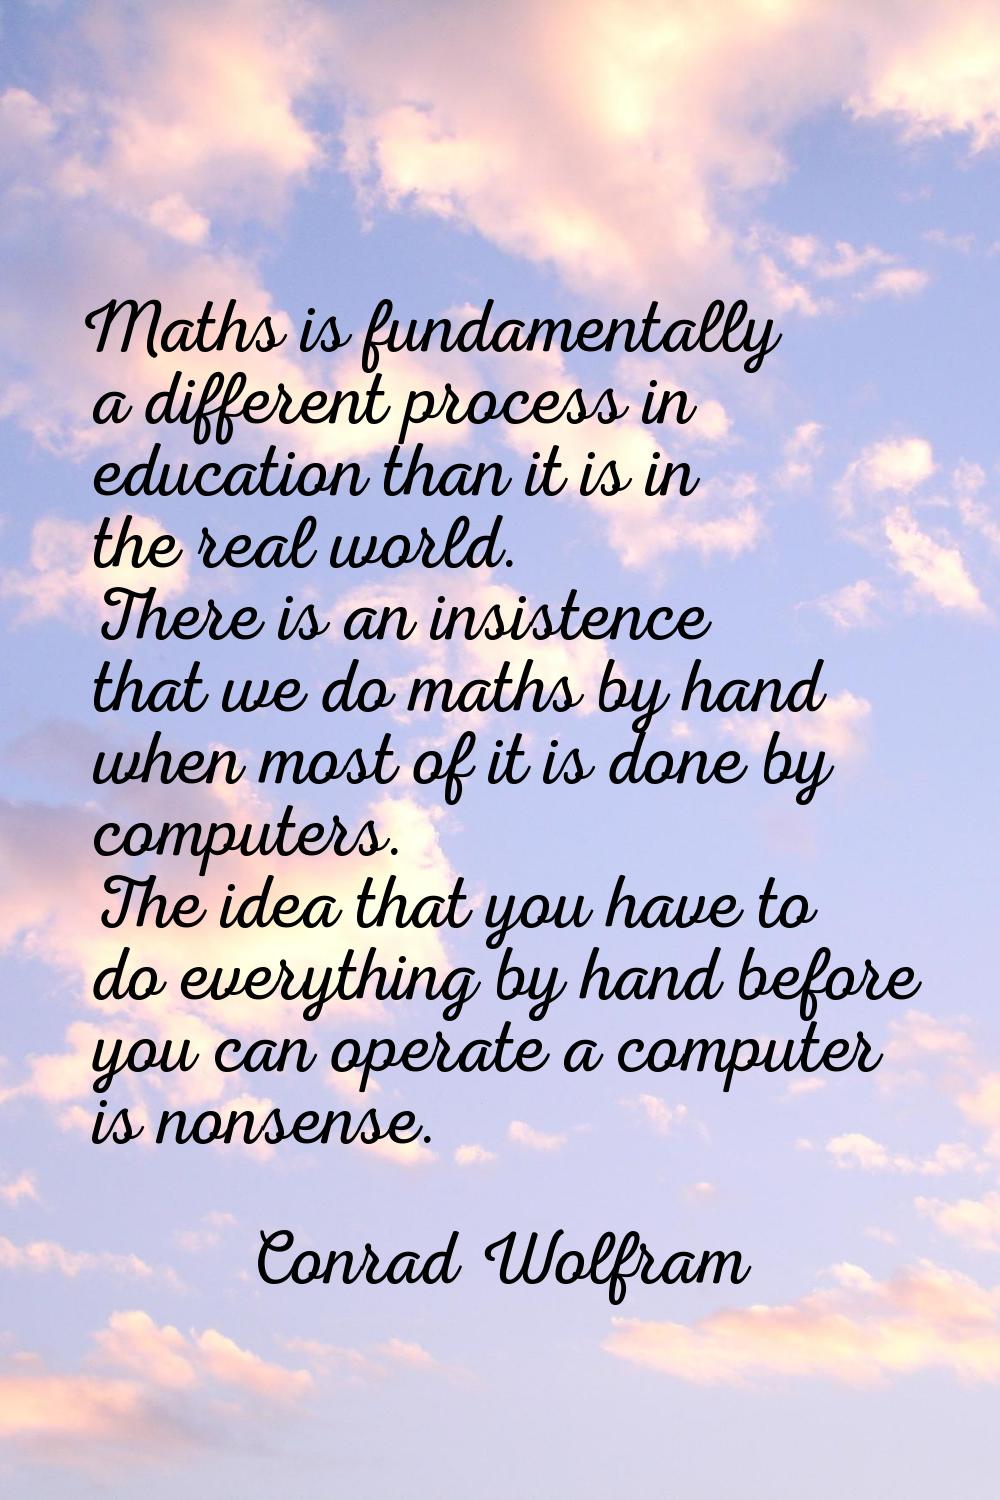 Maths is fundamentally a different process in education than it is in the real world. There is an i